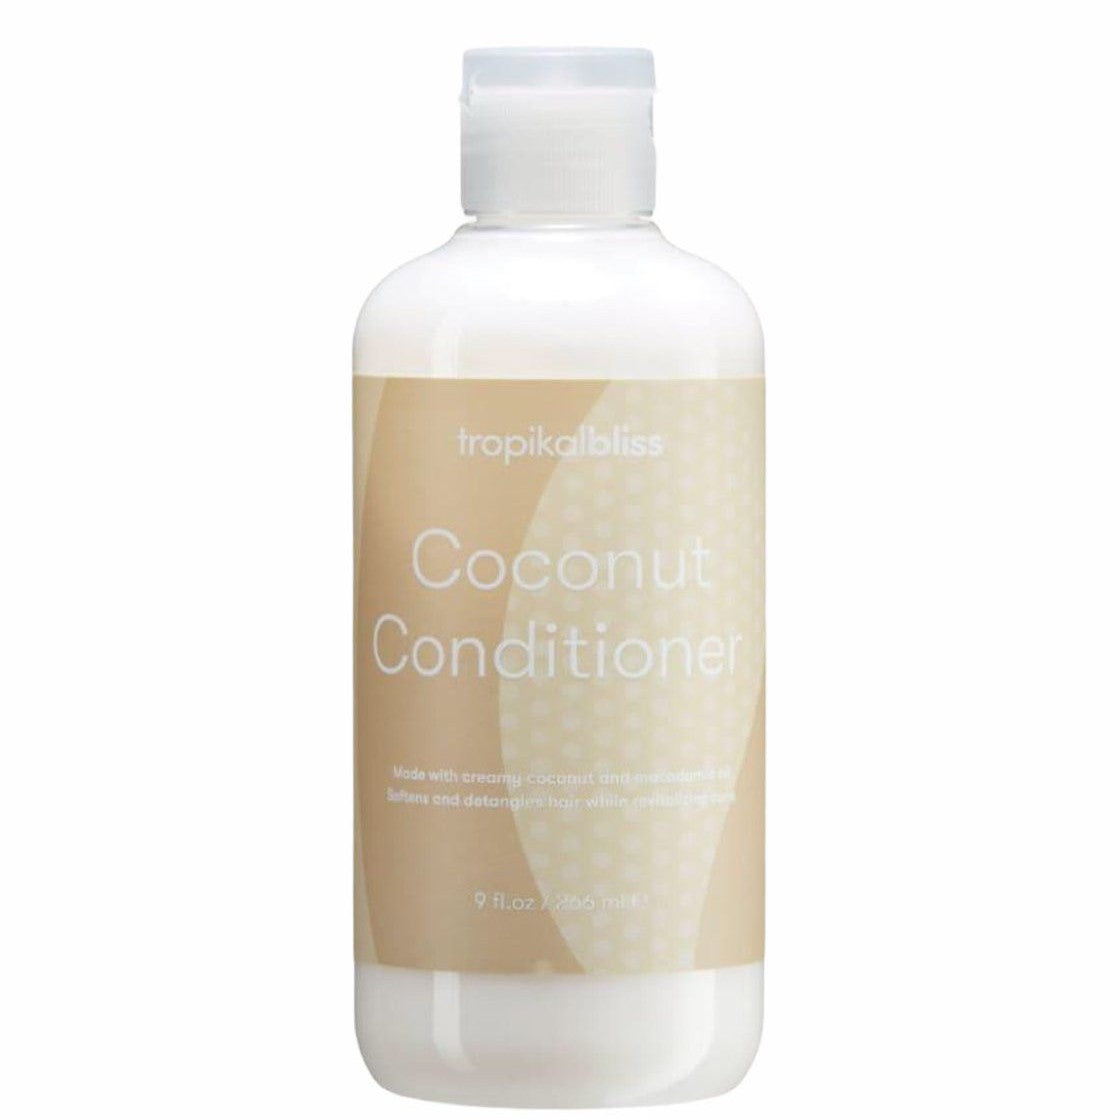 Tropical Bliss Coconut Conditioner 9oz / 266ML 